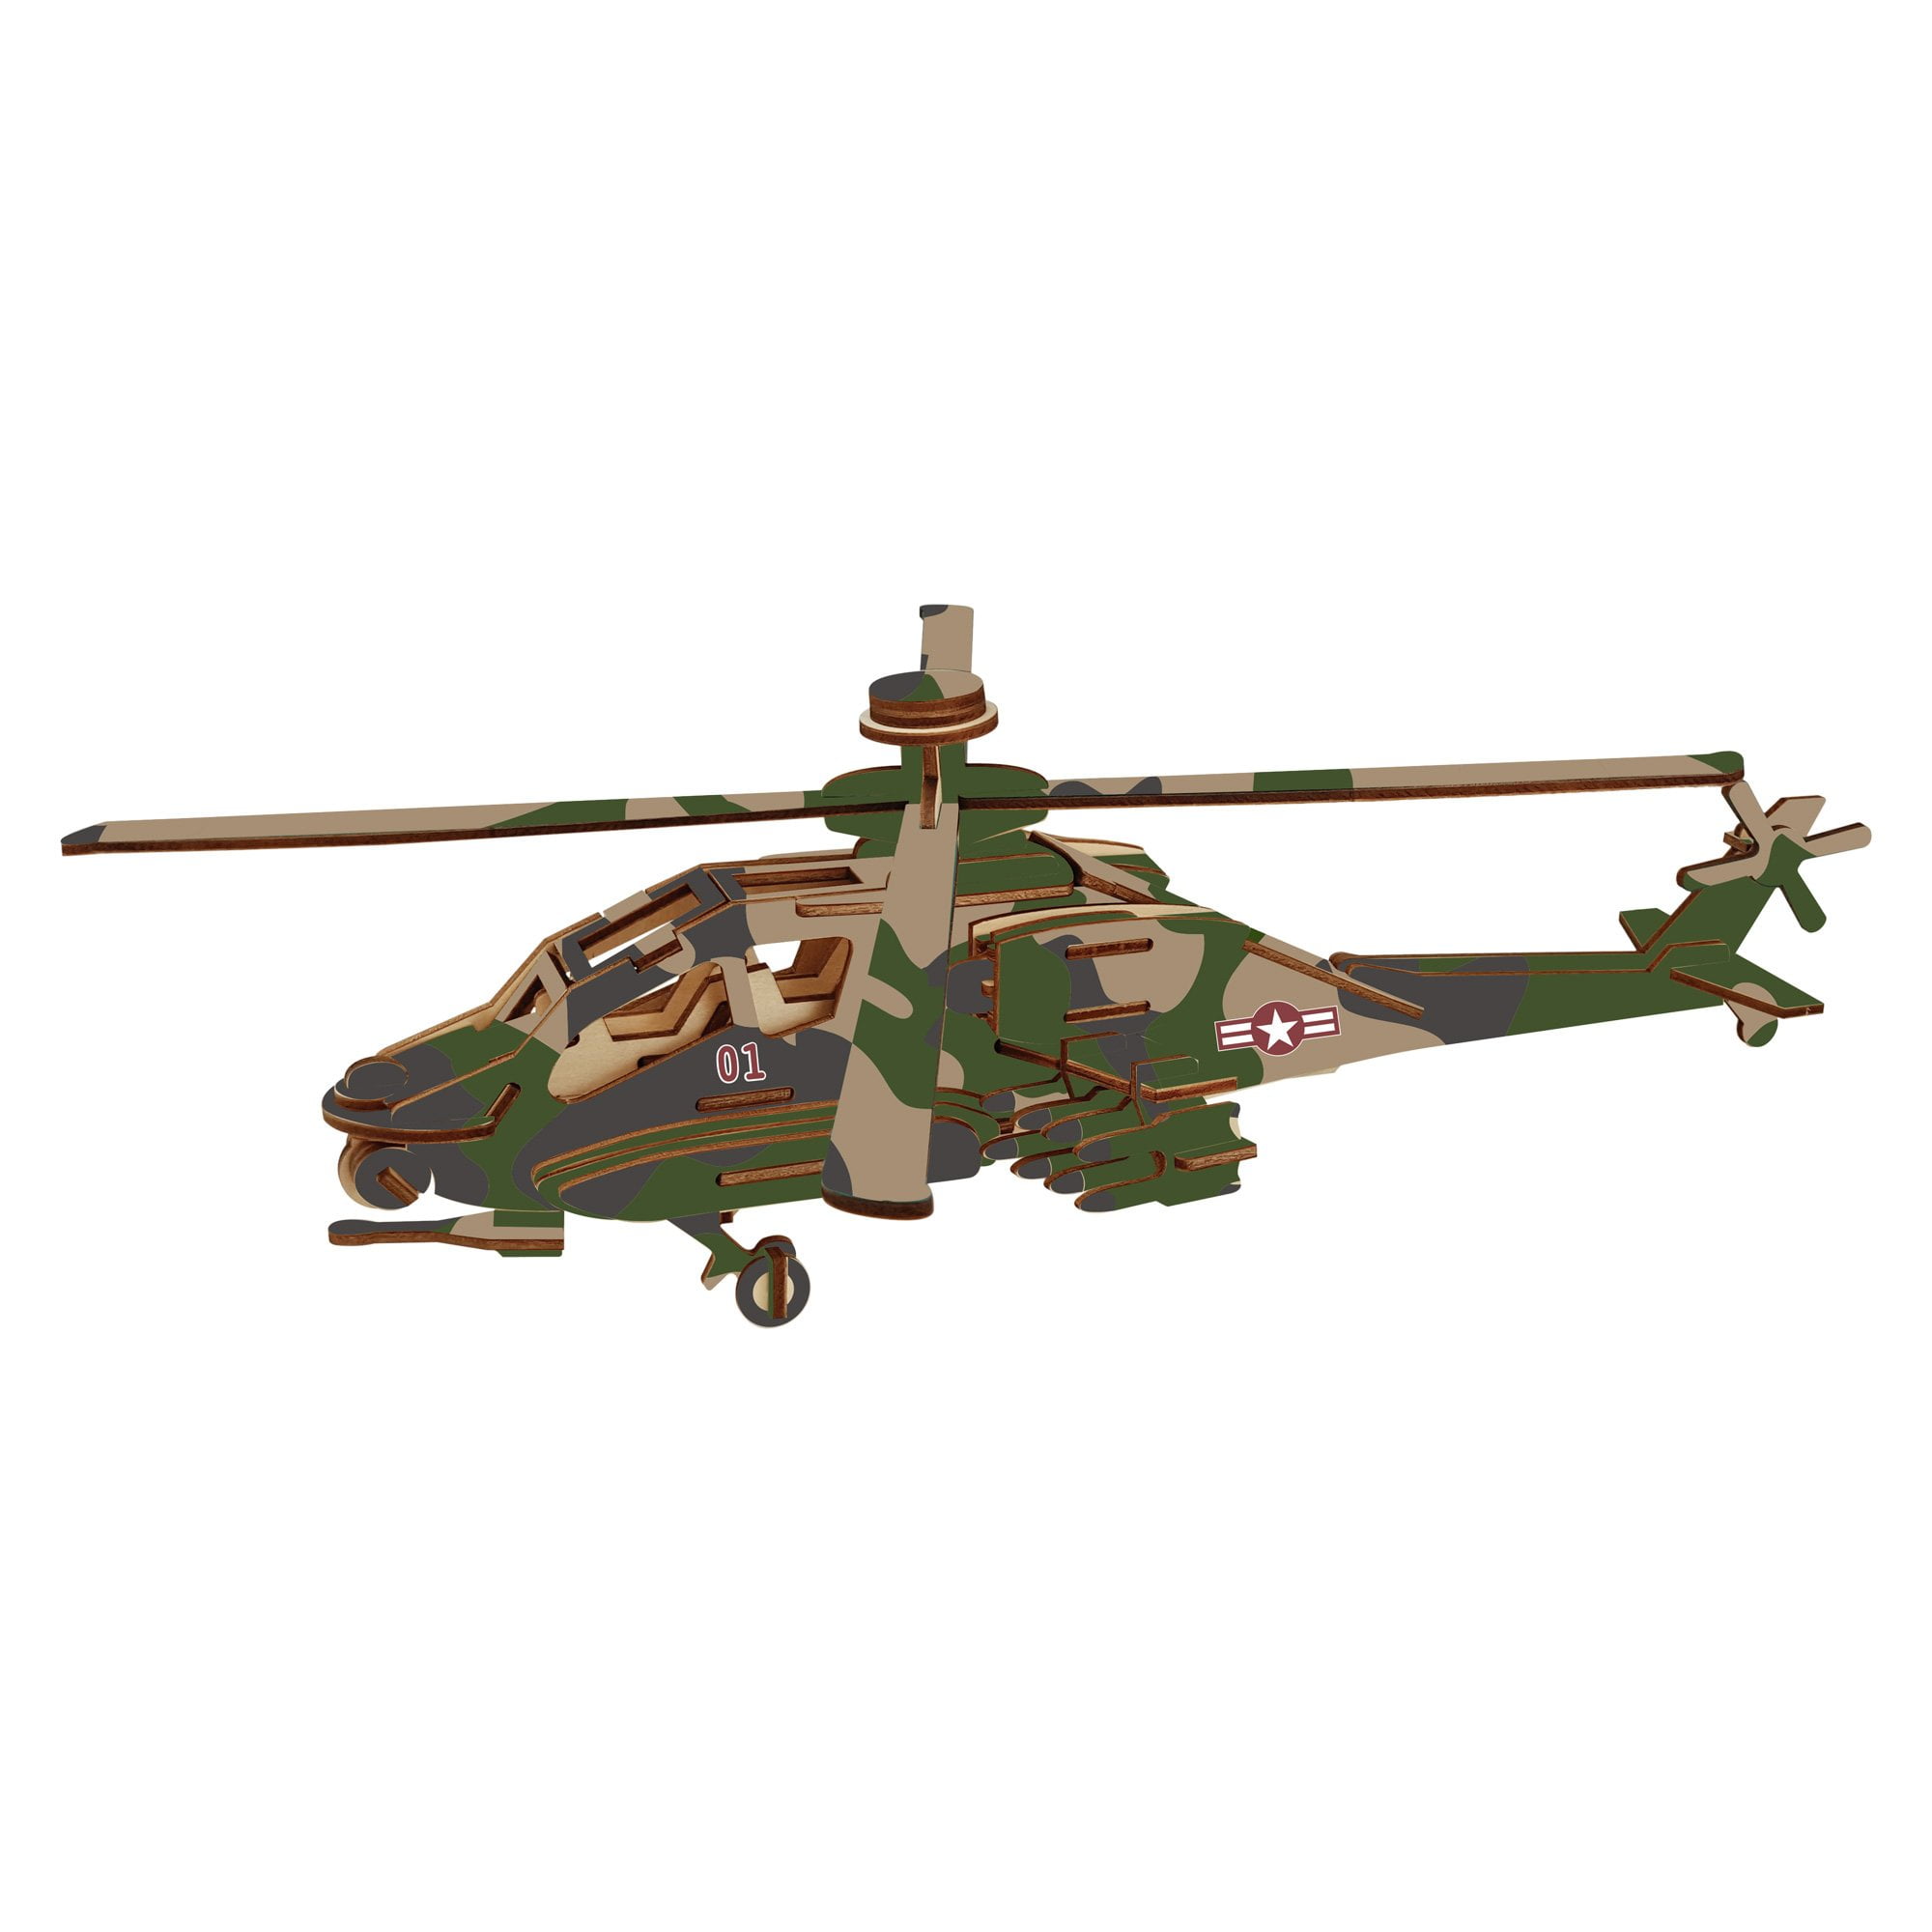 Helicopter 3D Wooden Model Puzzle KIDS ADULTS Apache Woodcraft Construction Kit 